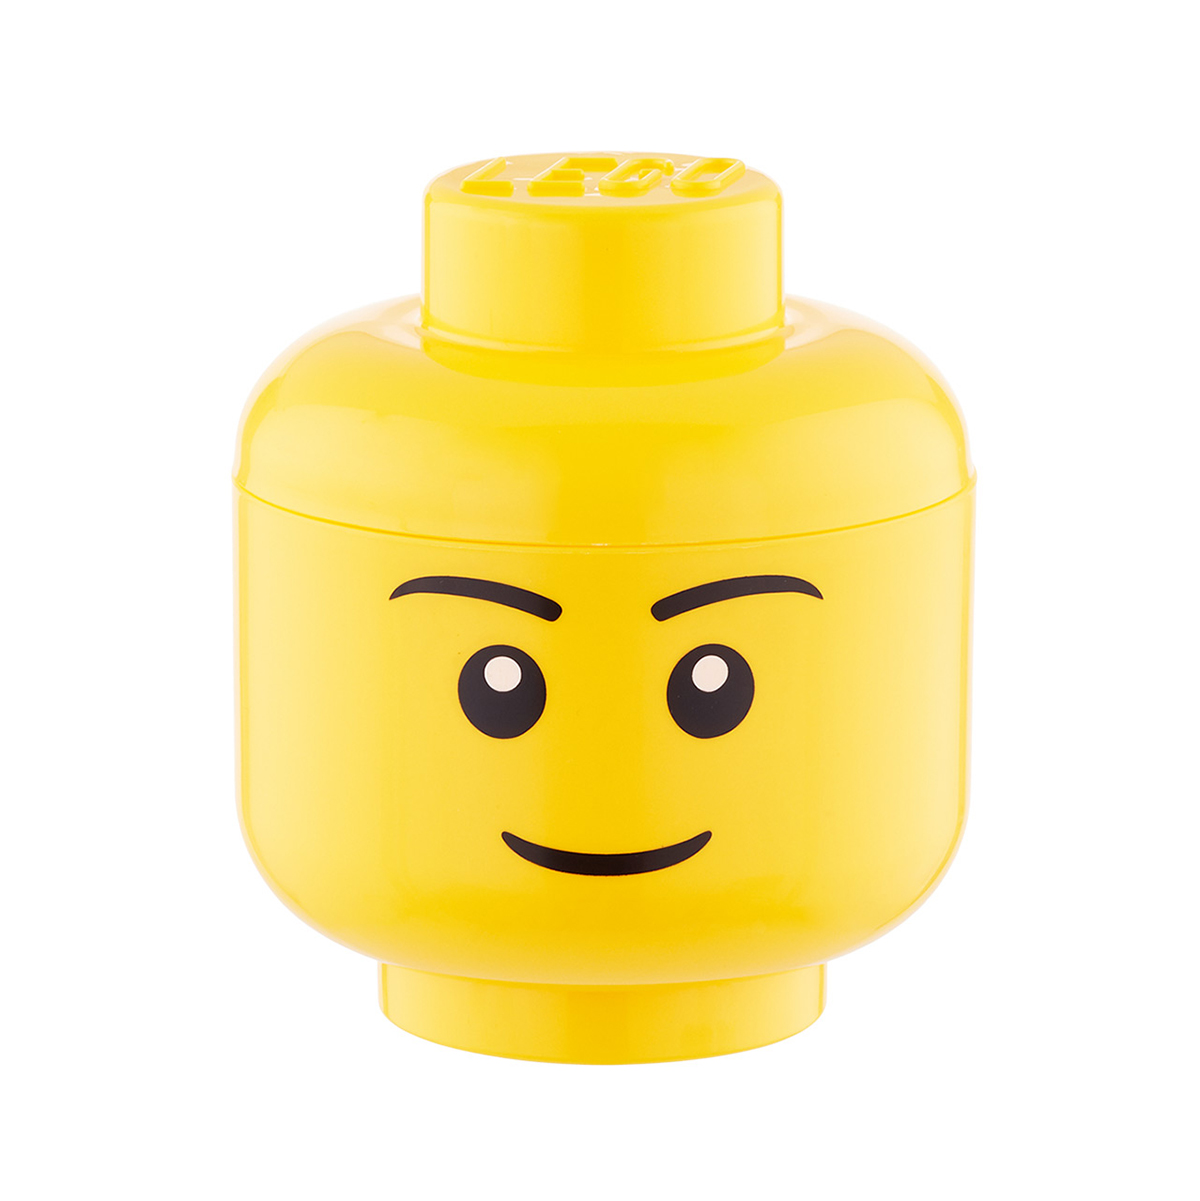 LEGO Storage Heads | The Container Store